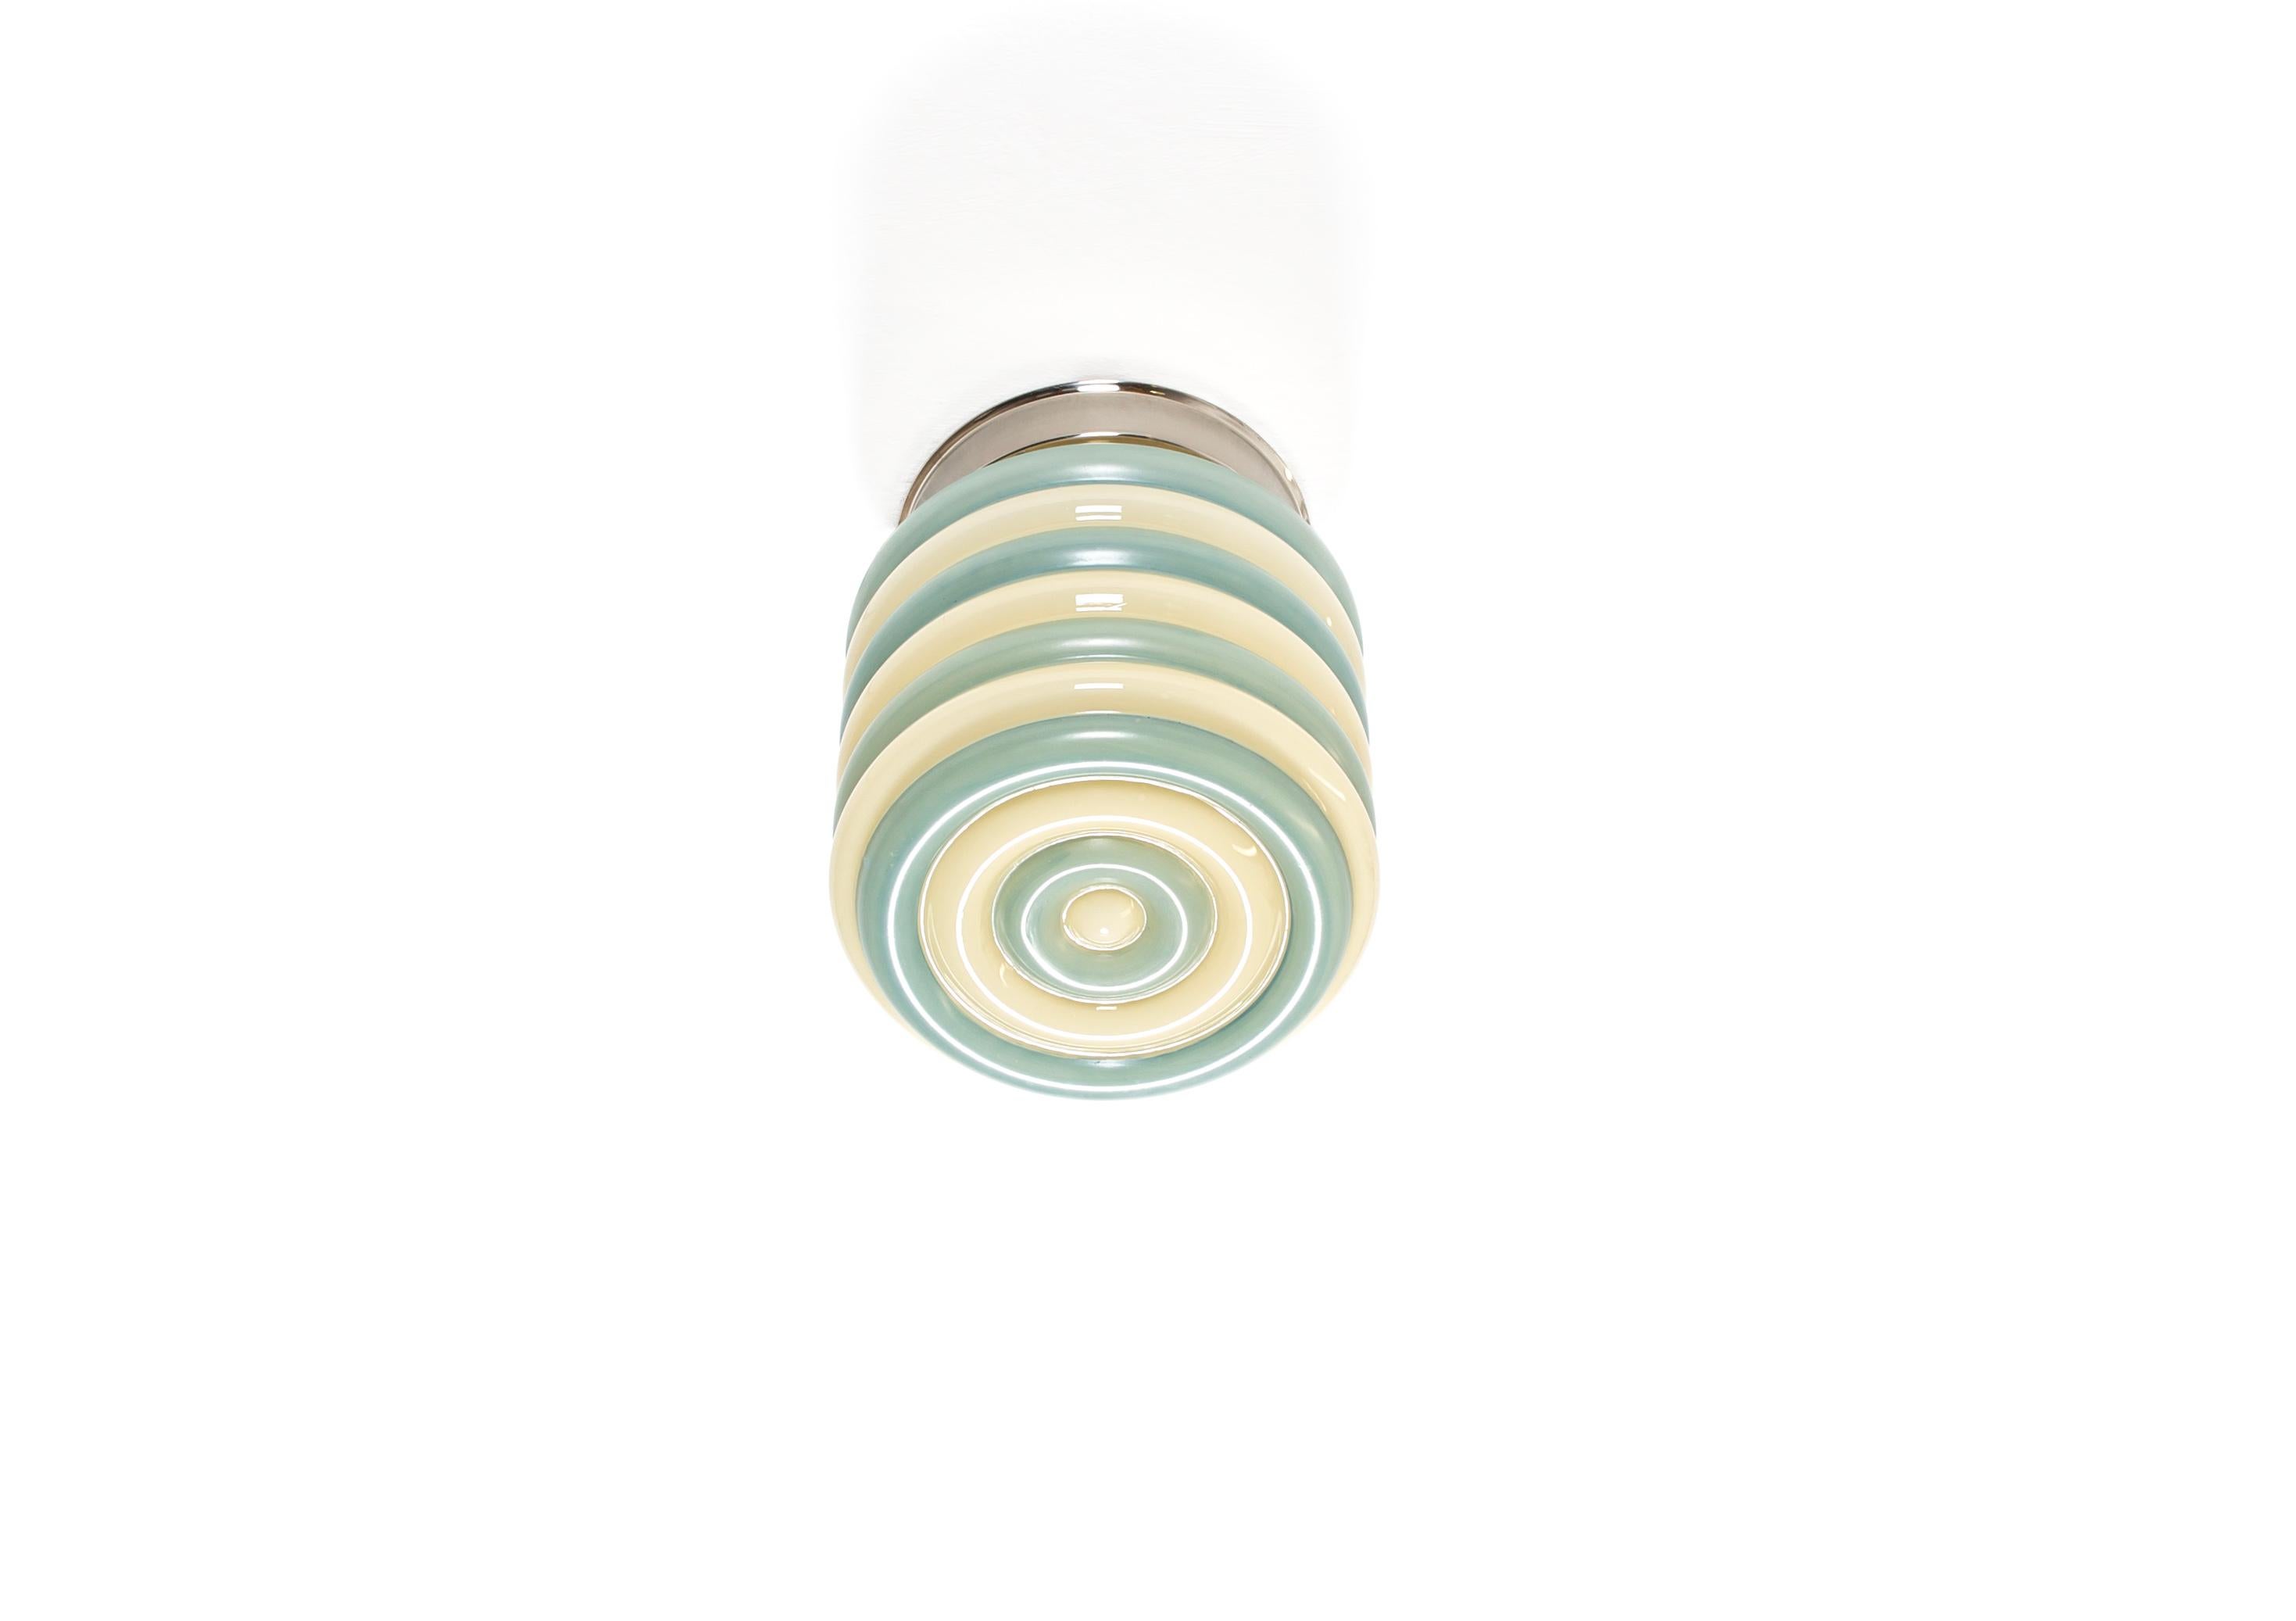 Wonderful and decorative ceiling light with embossed shade in opaline glass and chrome metal base. Designed and made in Norway from ca 1950s first half. The lamp is fully working and in good vintage condition. It is fitted with one E27 bulb holder